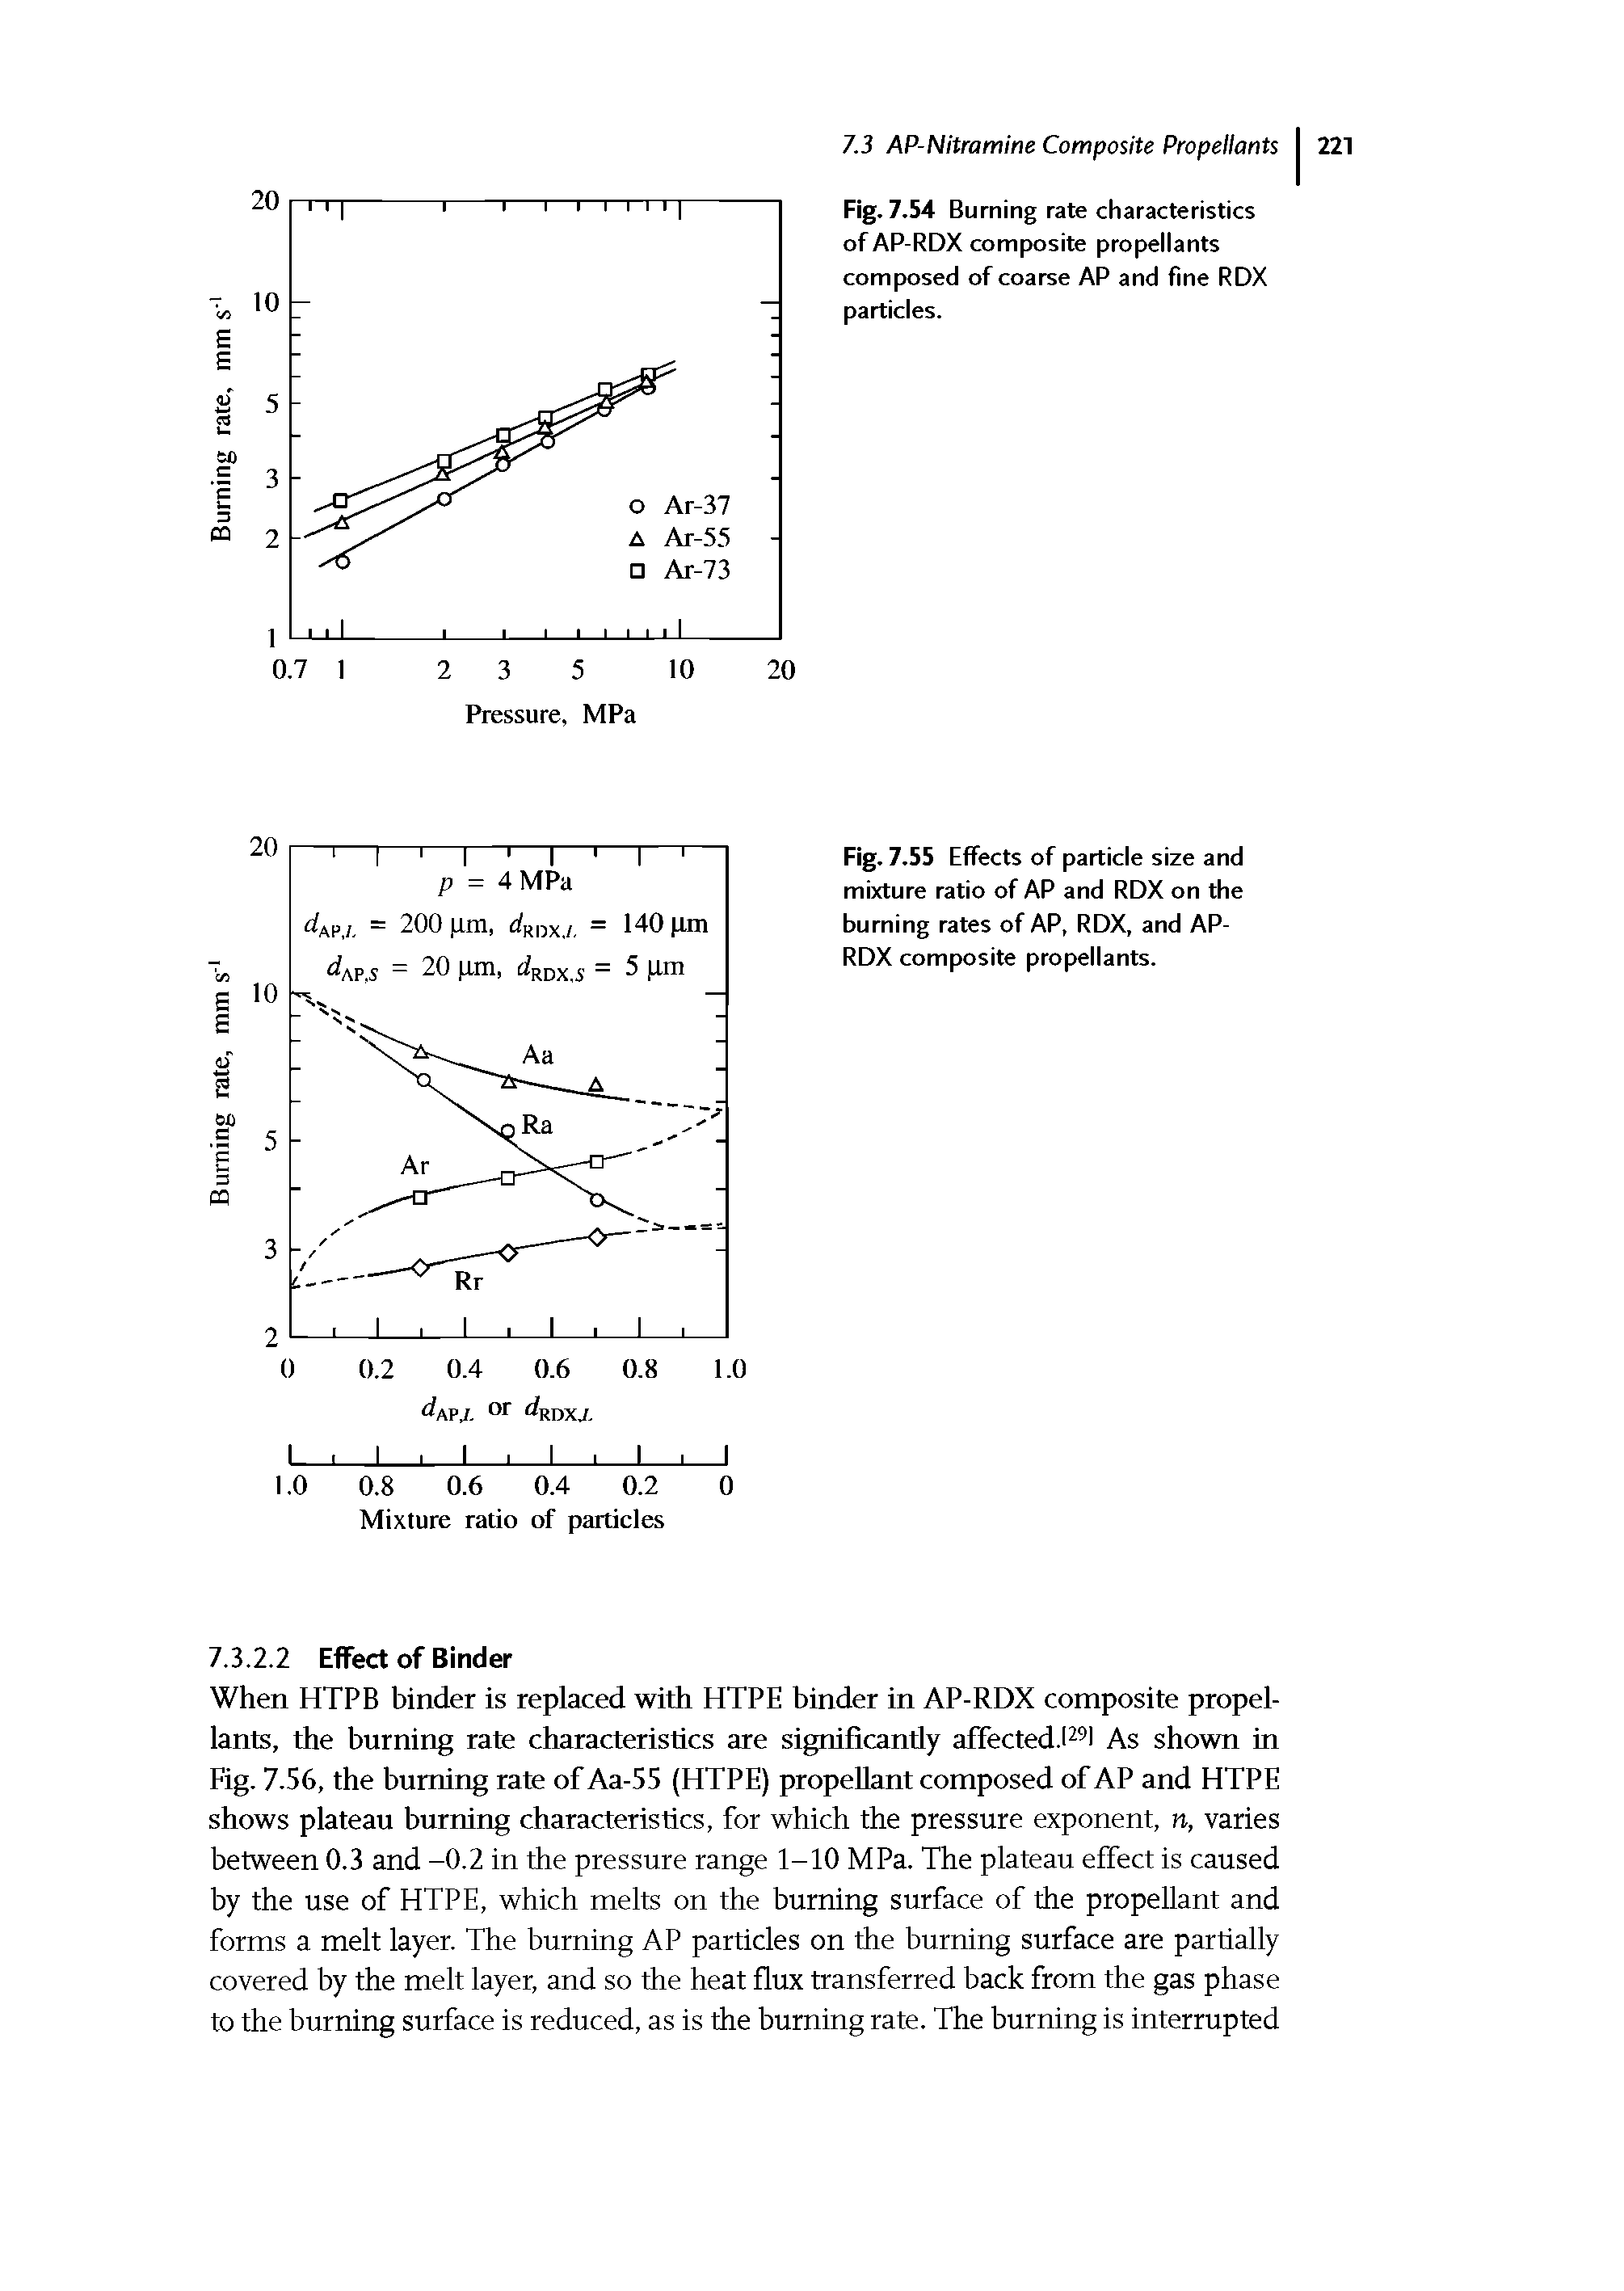 Fig. 7.55 Effects of particle size and mixture ratio of AP and RDX on the burning rates of AP, RDX, and AP-RDX composite propellants.